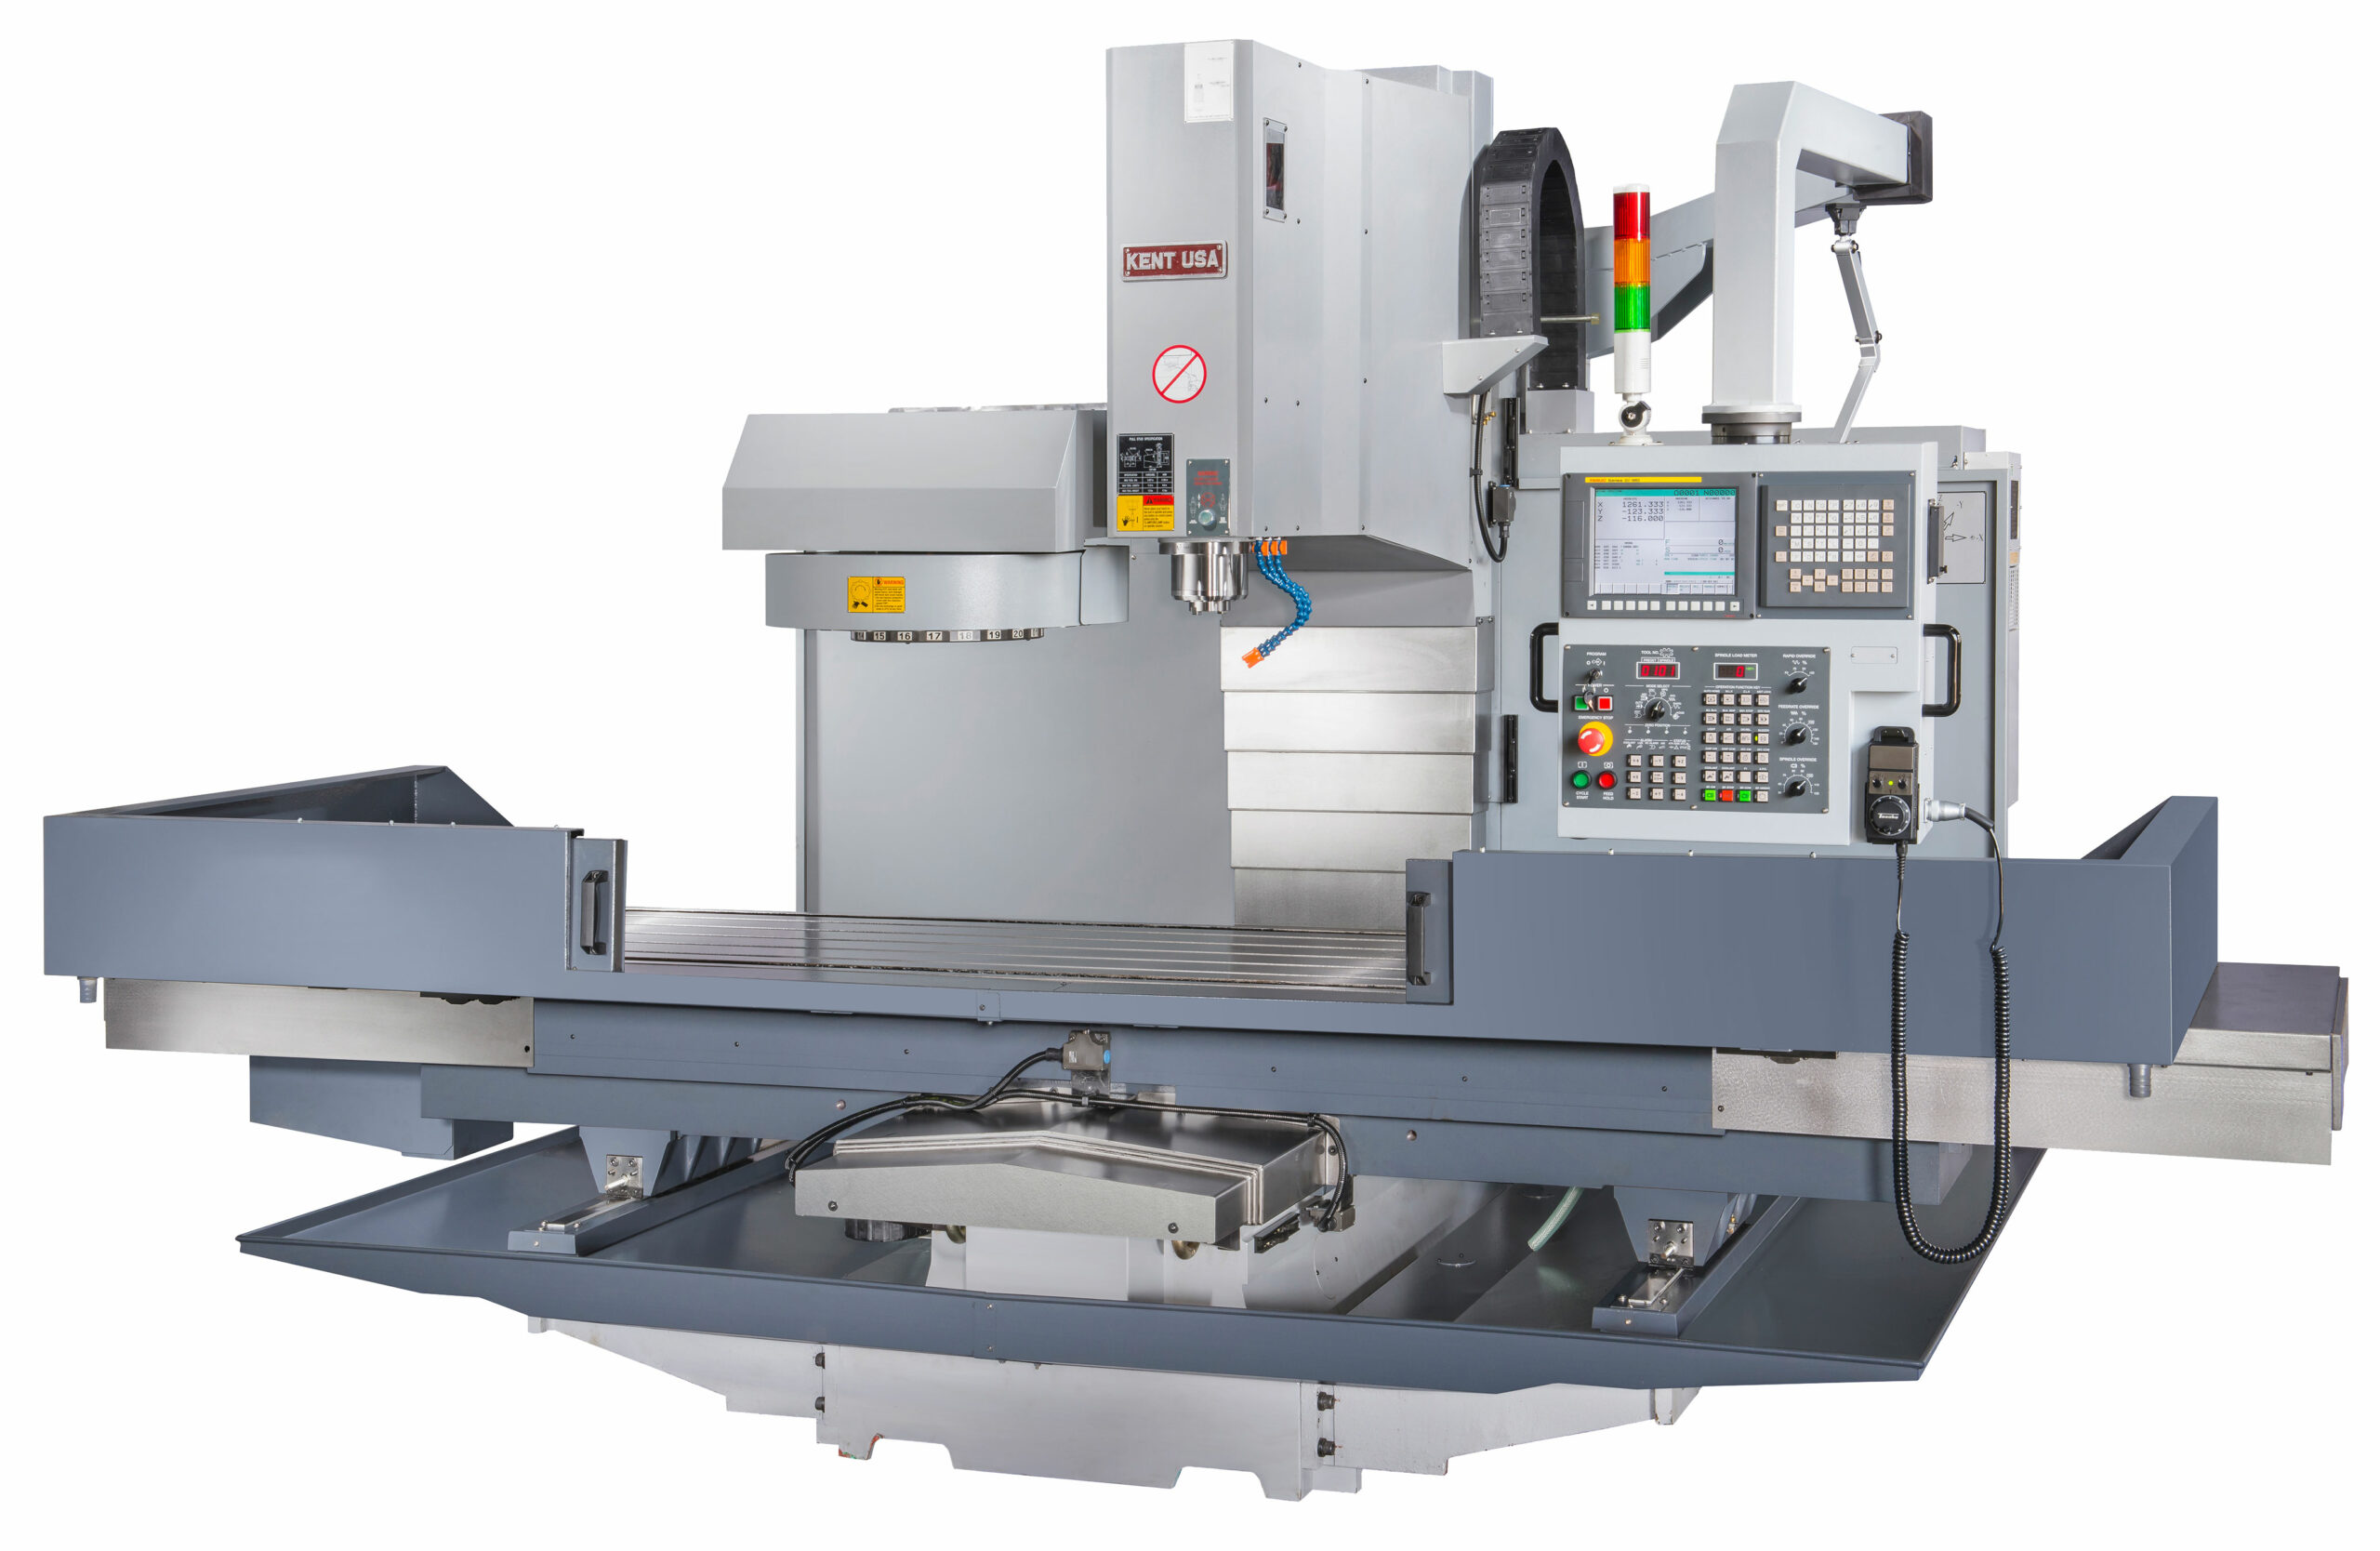 Oh jee troon isolatie Buy S-2000 CNC Bed Mills and Machining Centers - Kent Industrial USA